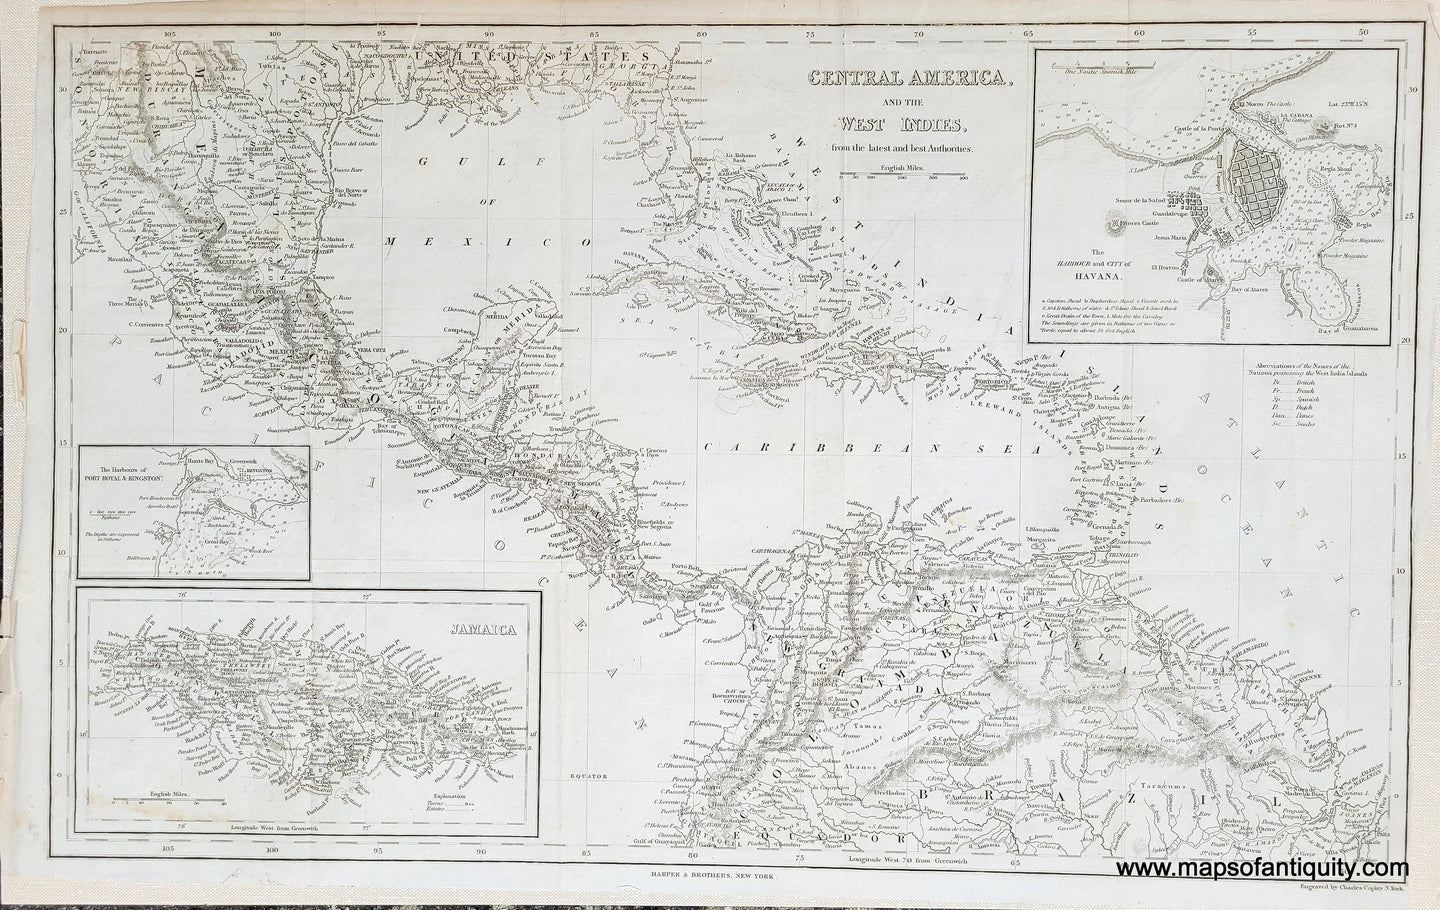 Genuine-Antique-Map-Central-America-and-the-West-Indies-from-the-latest-and-best-Authorities-1843-Copley-Maps-Of-Antiquity